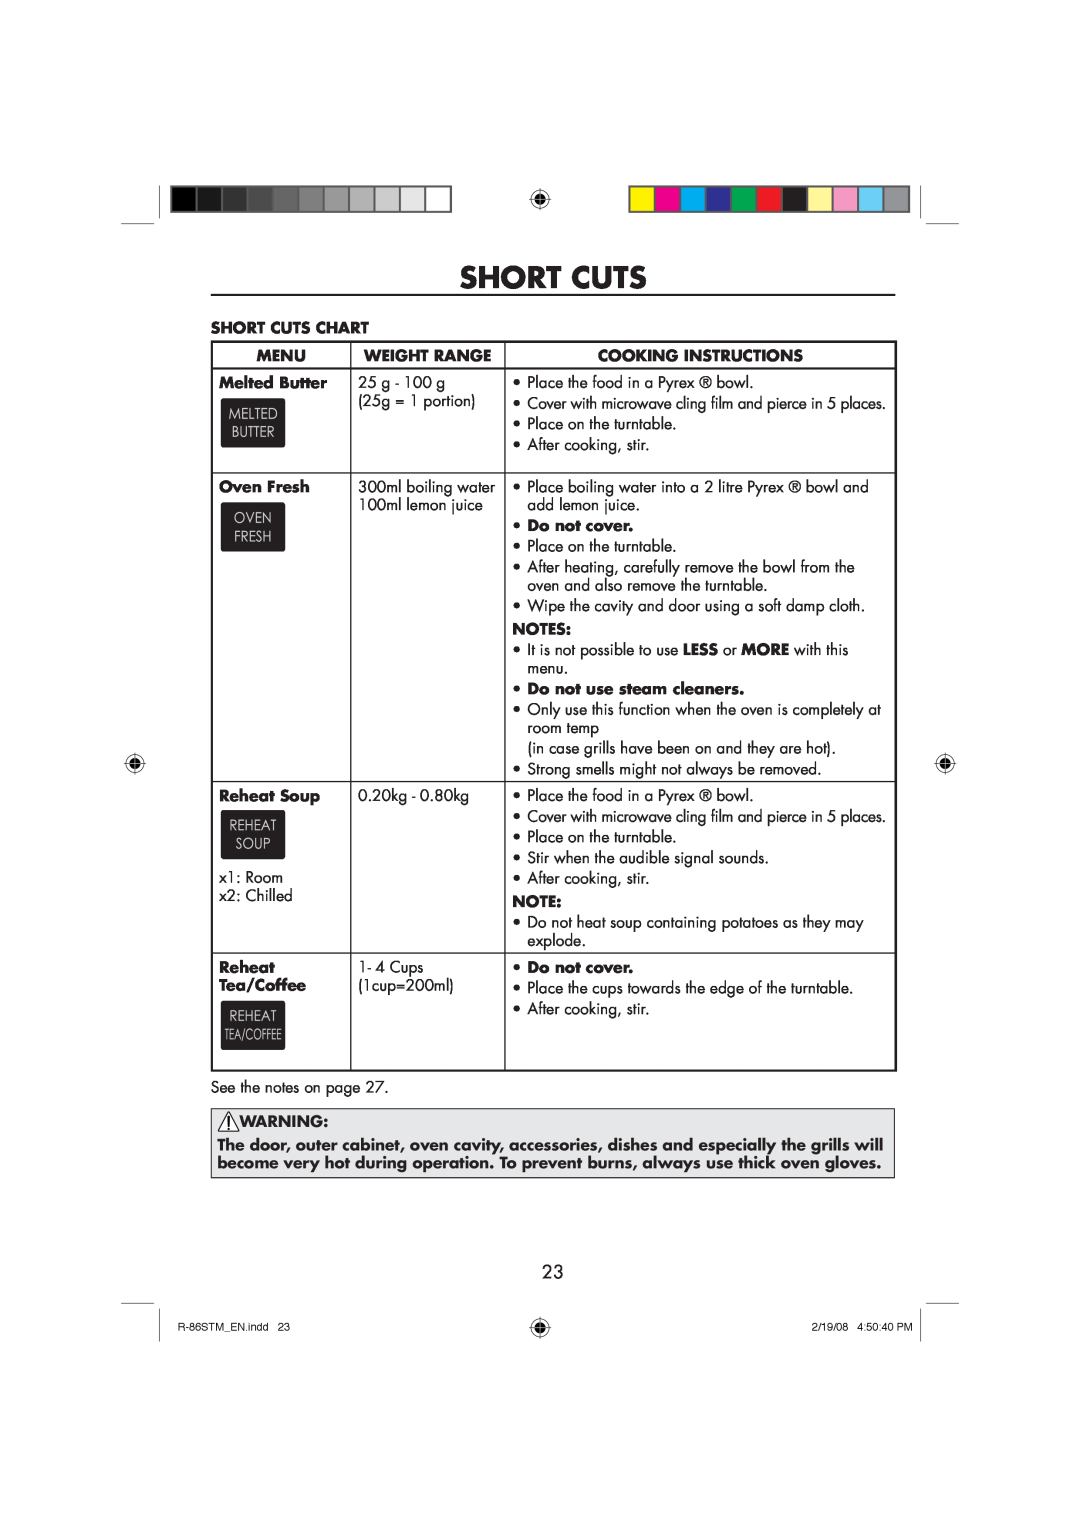 Sharp R-86STM Short Cuts Chart, Menu, Weight Range, Cooking Instructions, Melted Butter, Oven Fresh, Do not cover 